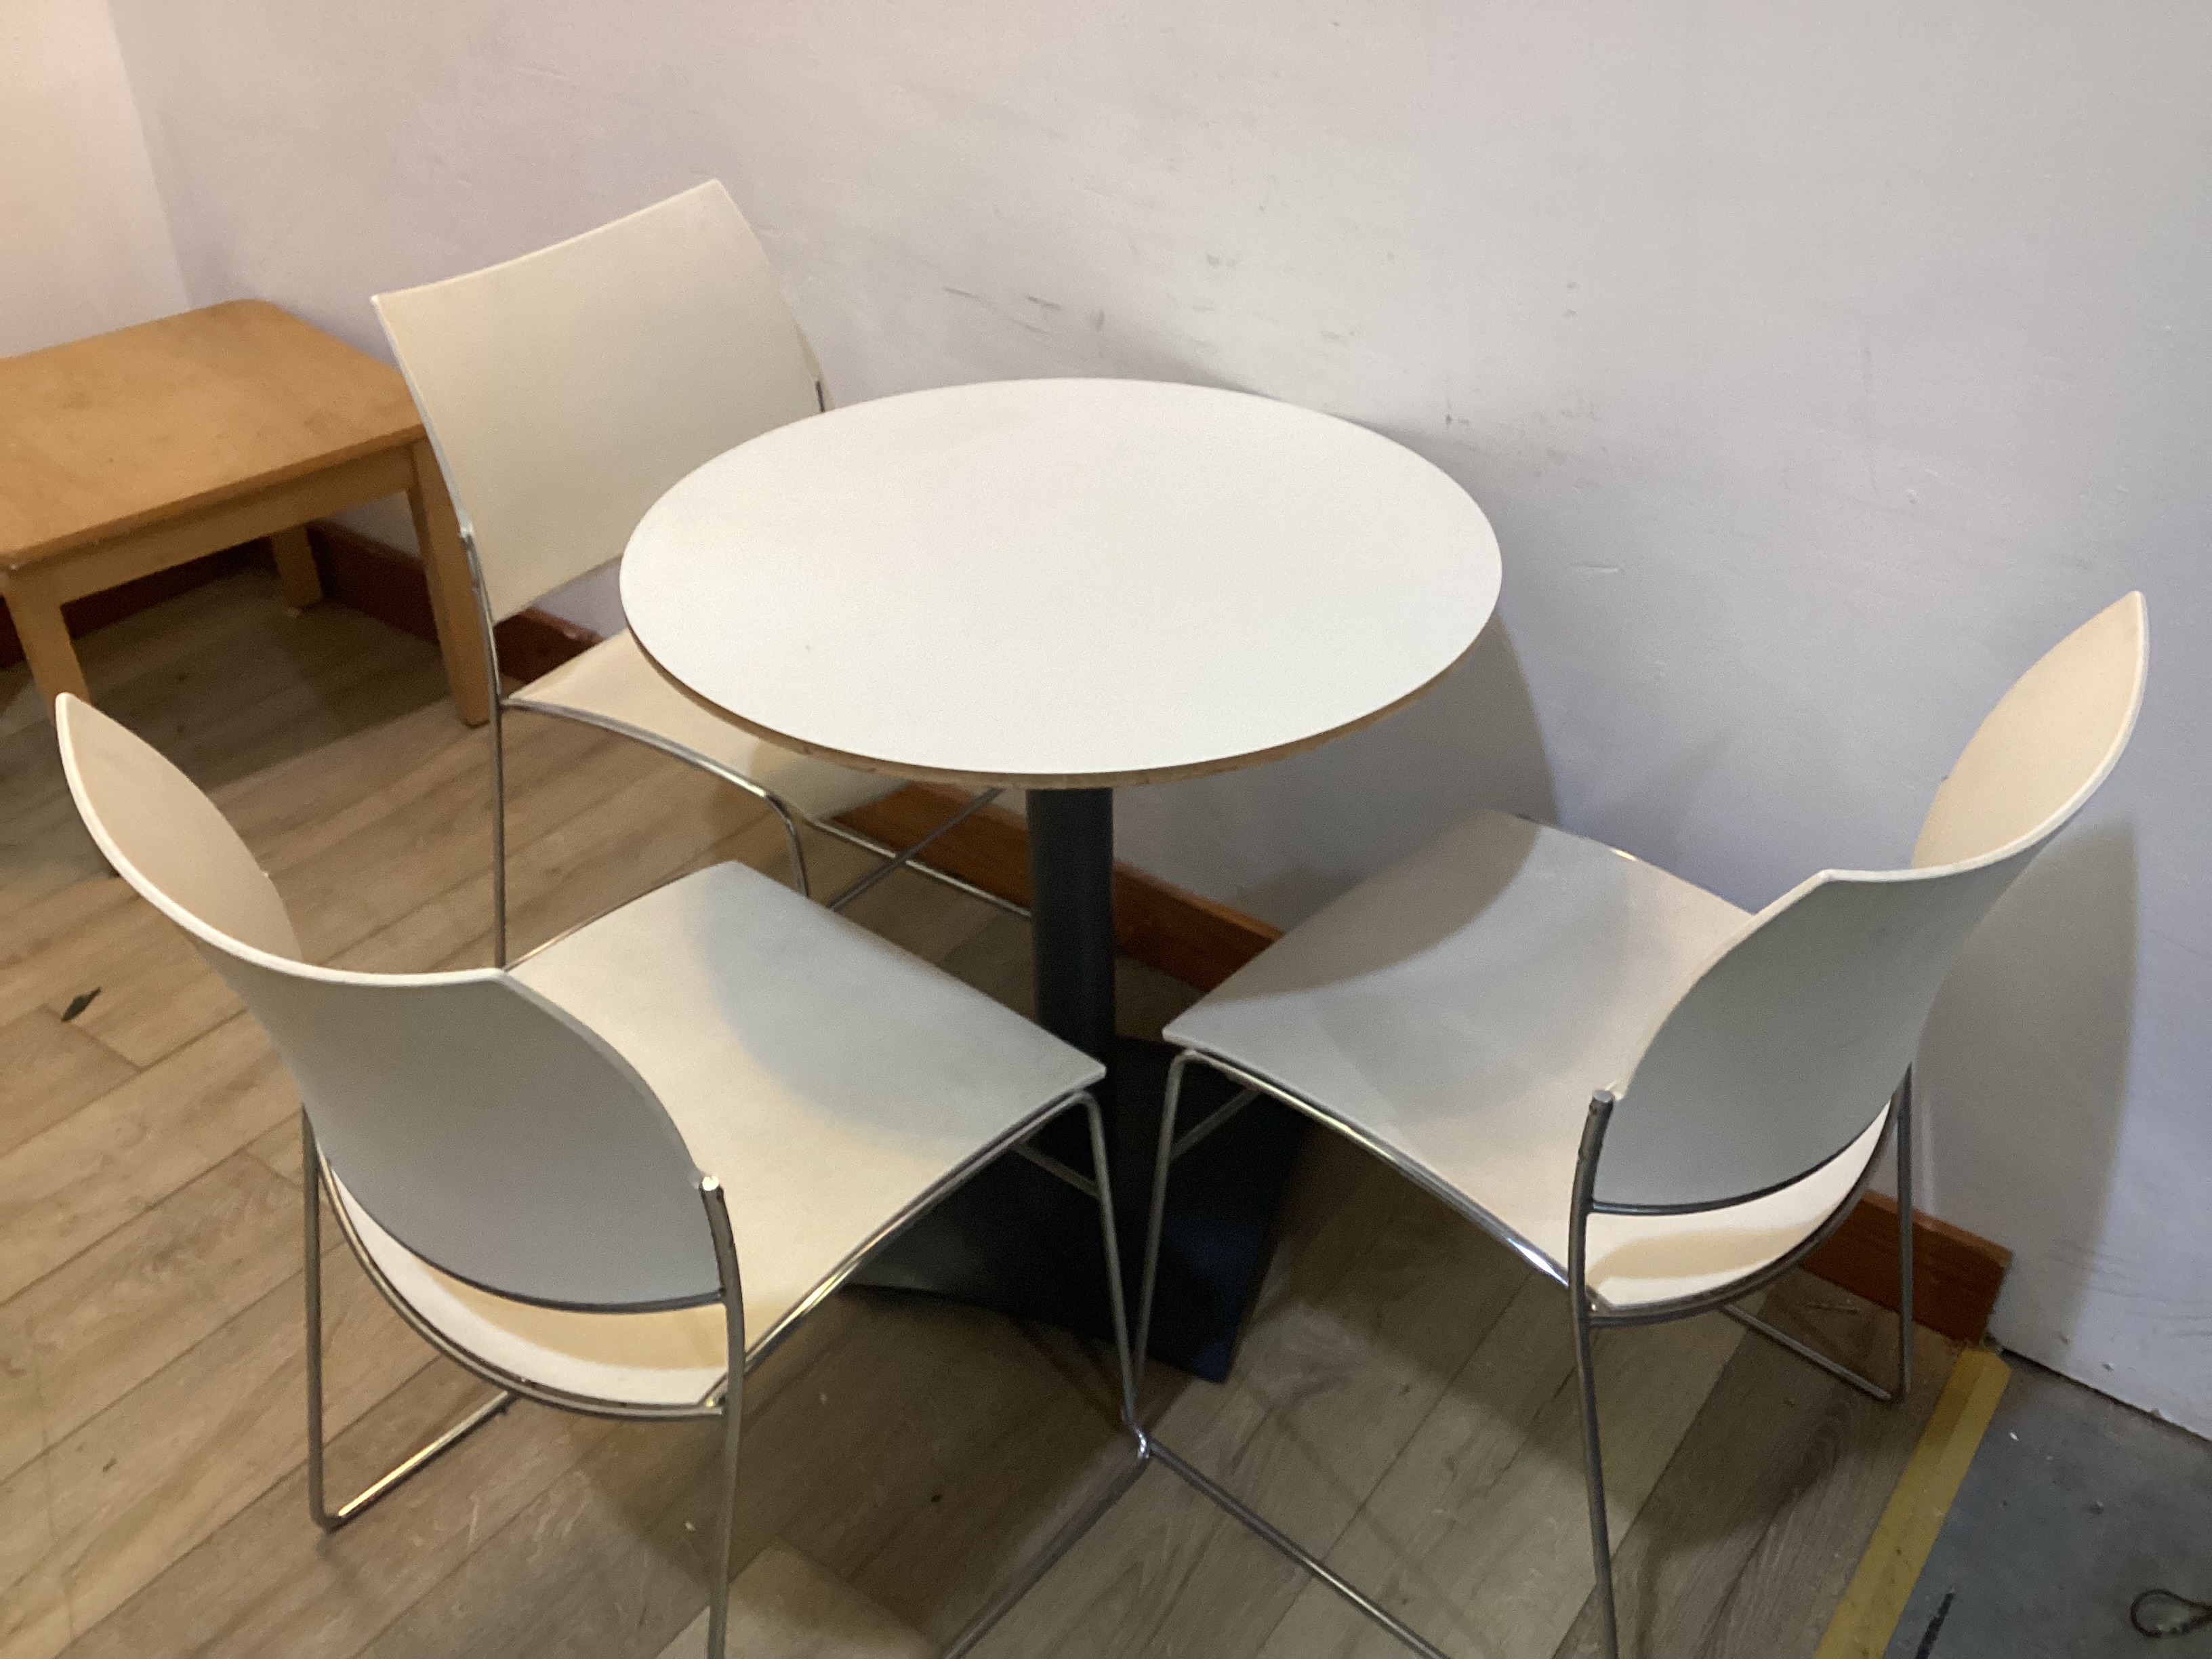 Dining Table and Four Chairs